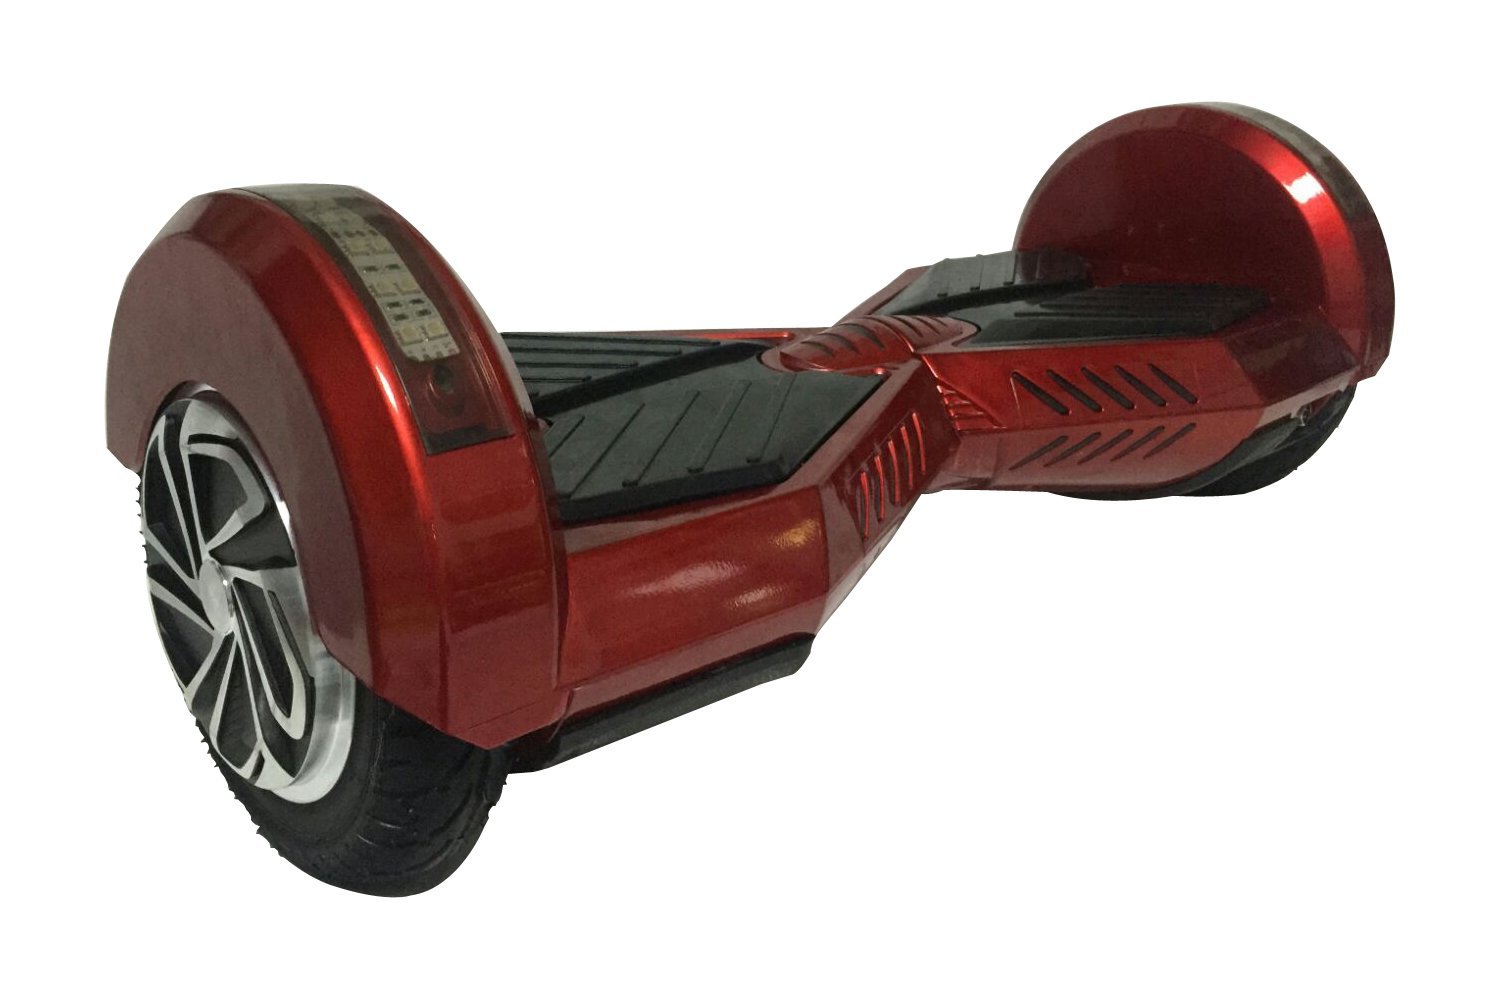 10 best hoverboards rated 2 stars and above (6)